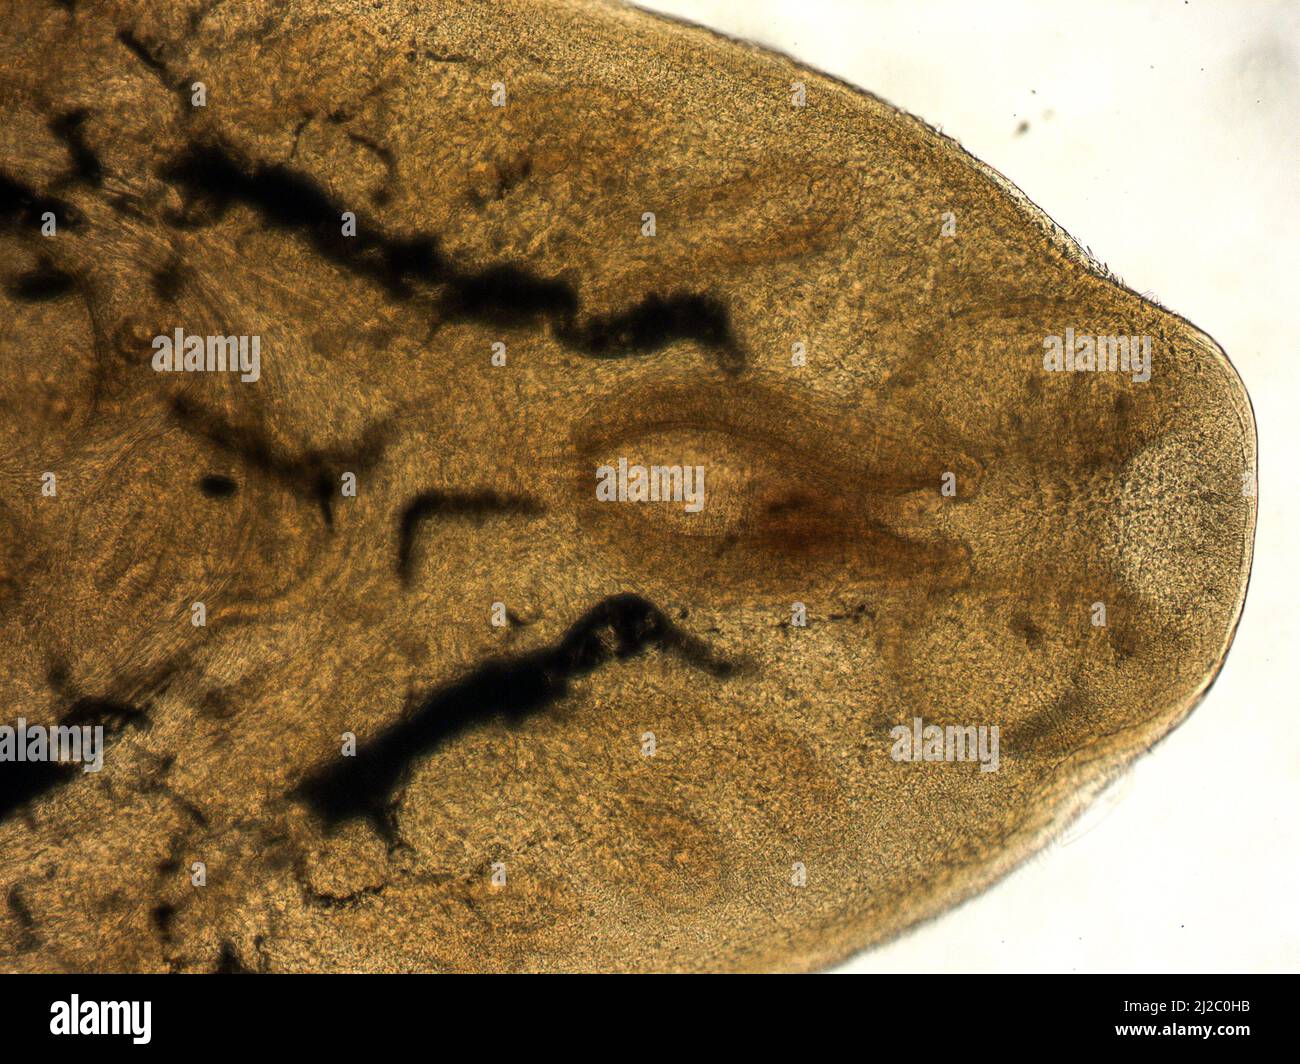 Parasitic flatworms in humans. Liver fluke (fasciola hepatica) adult stage in light microscope. Stock Photo